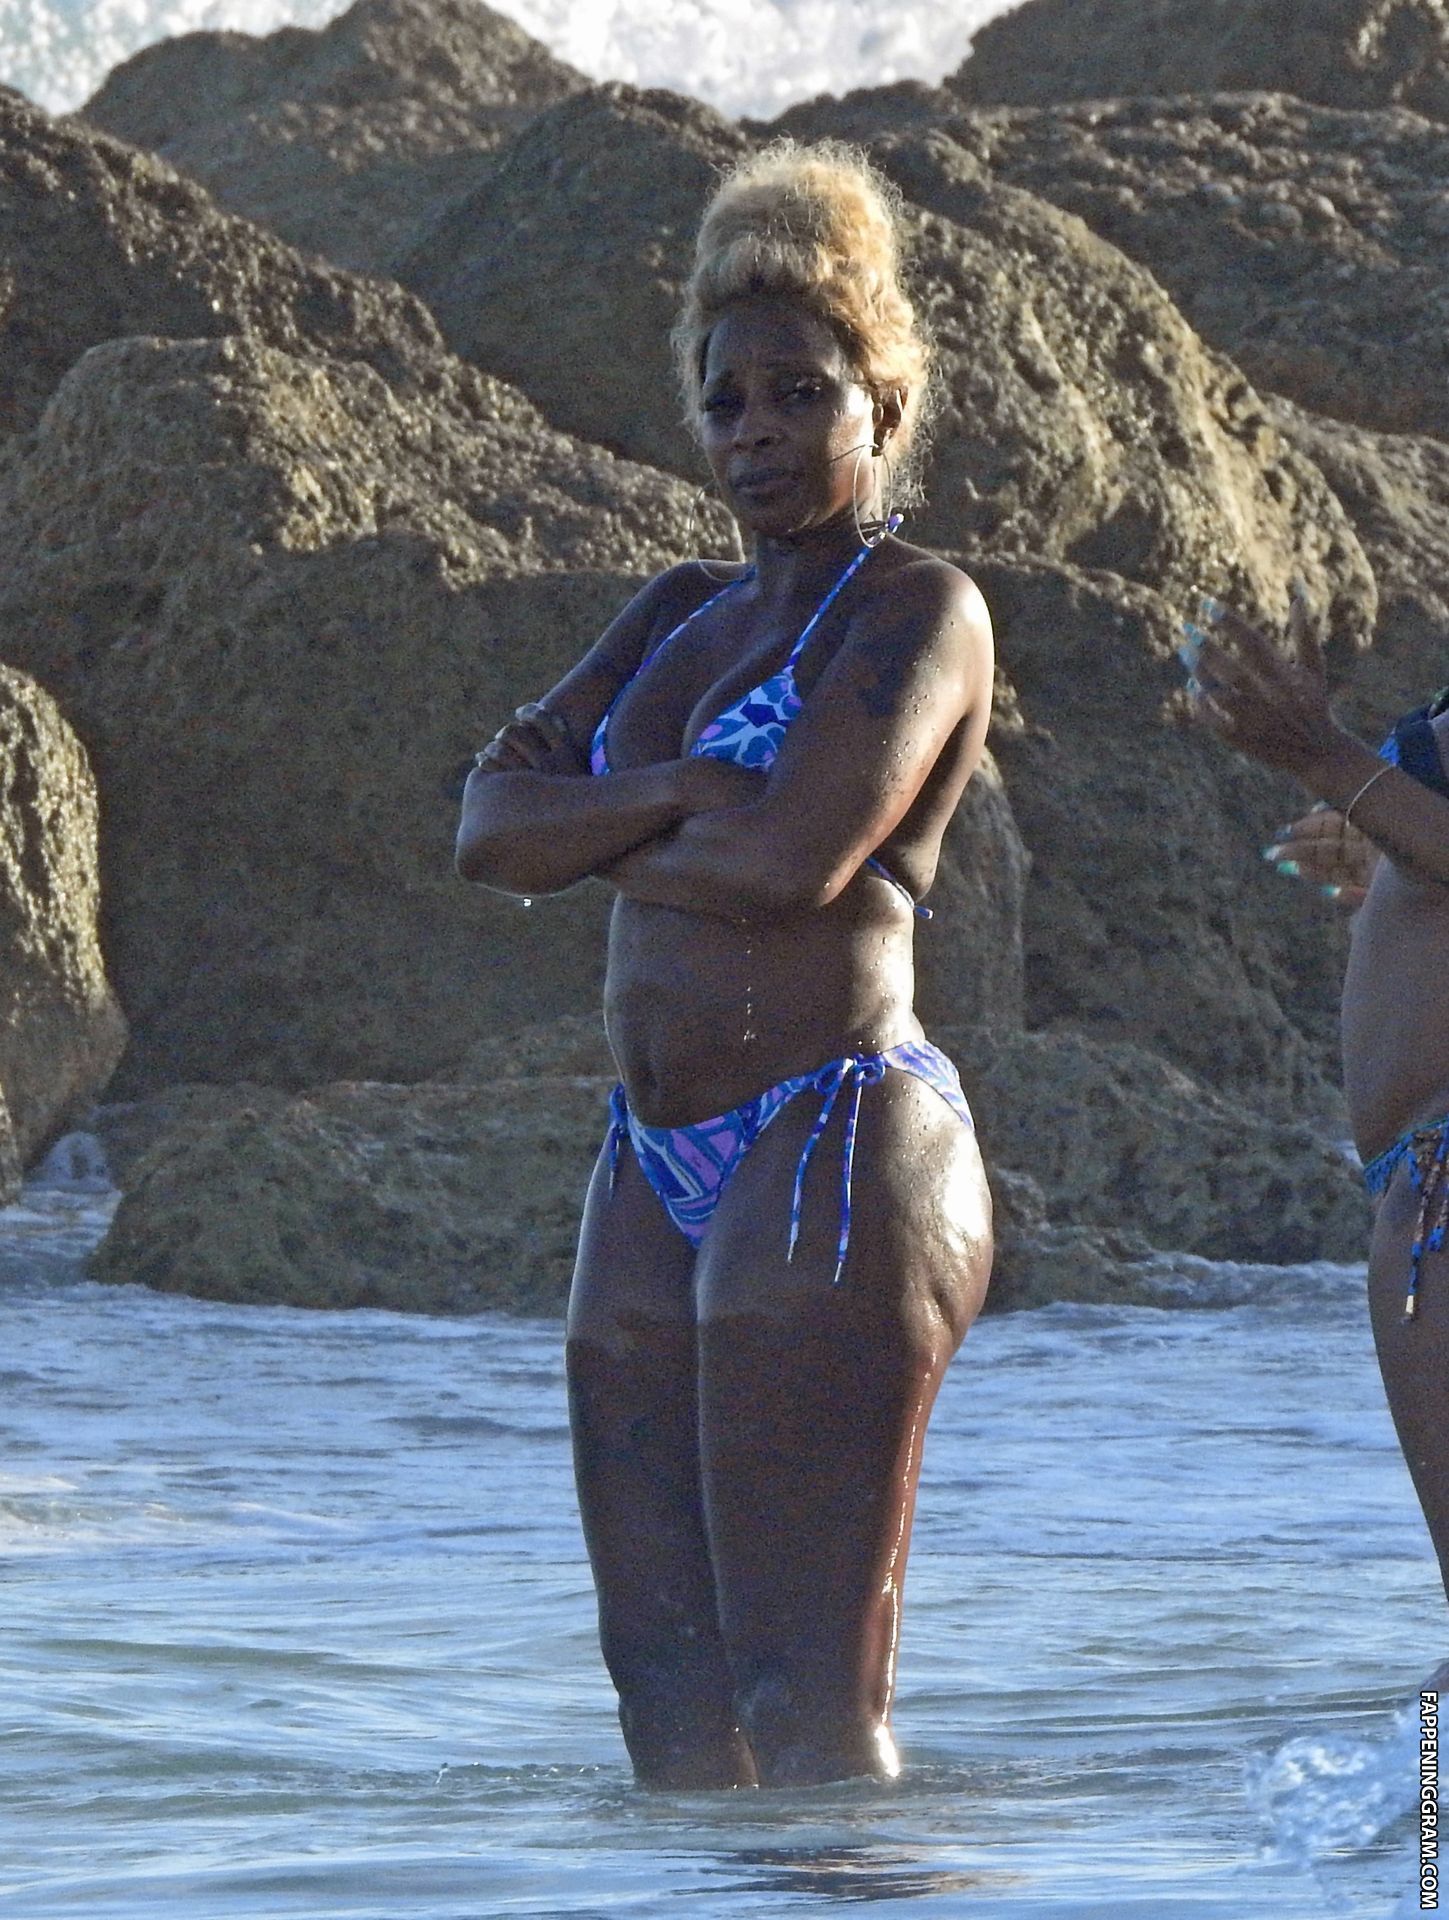 Mary j blige in the nude